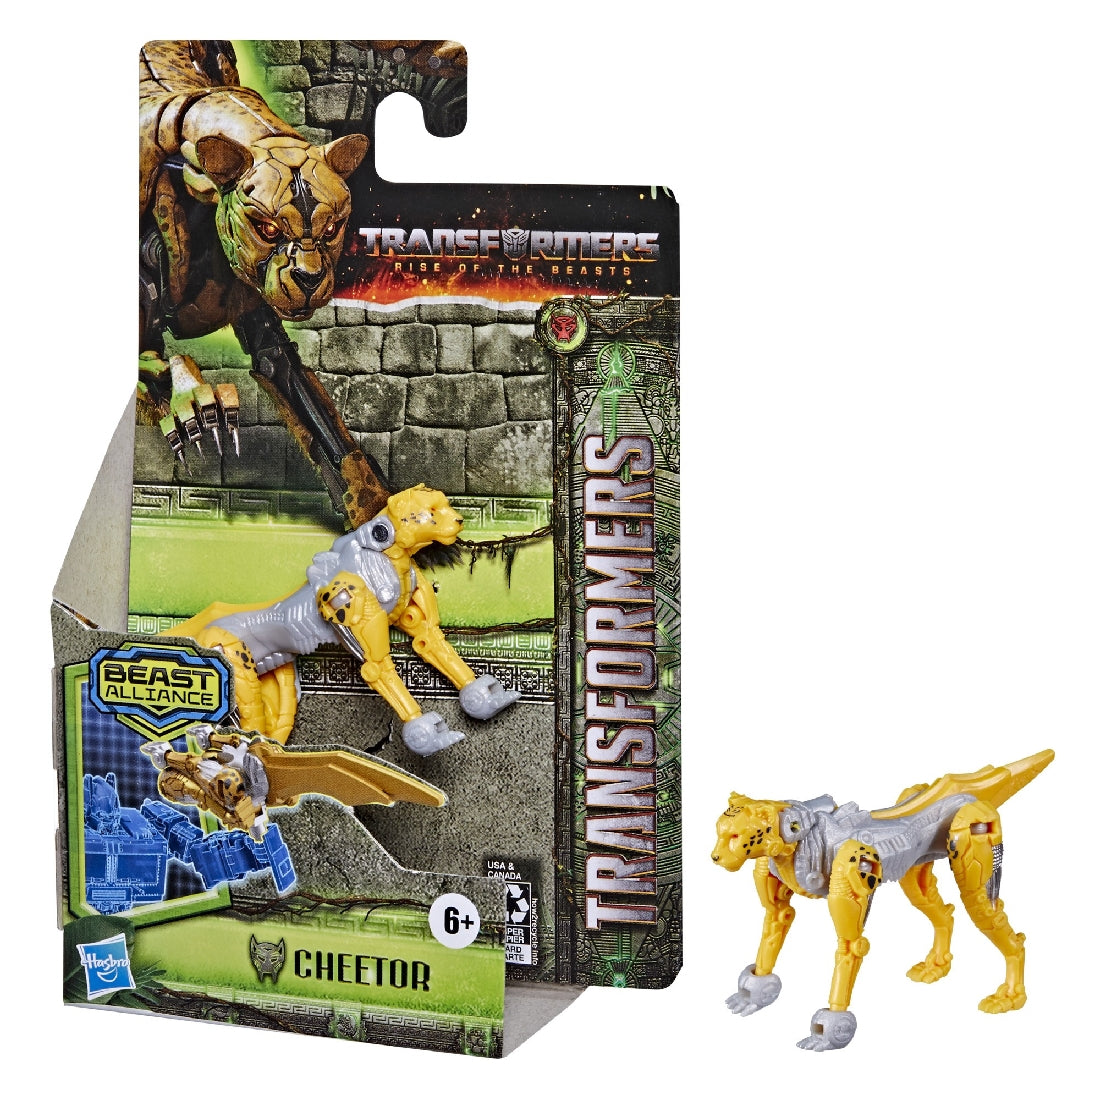 TRANSFORMERS RISE OF THE BEASTS - BEAST BATTLE MASTERS - CHEETOR